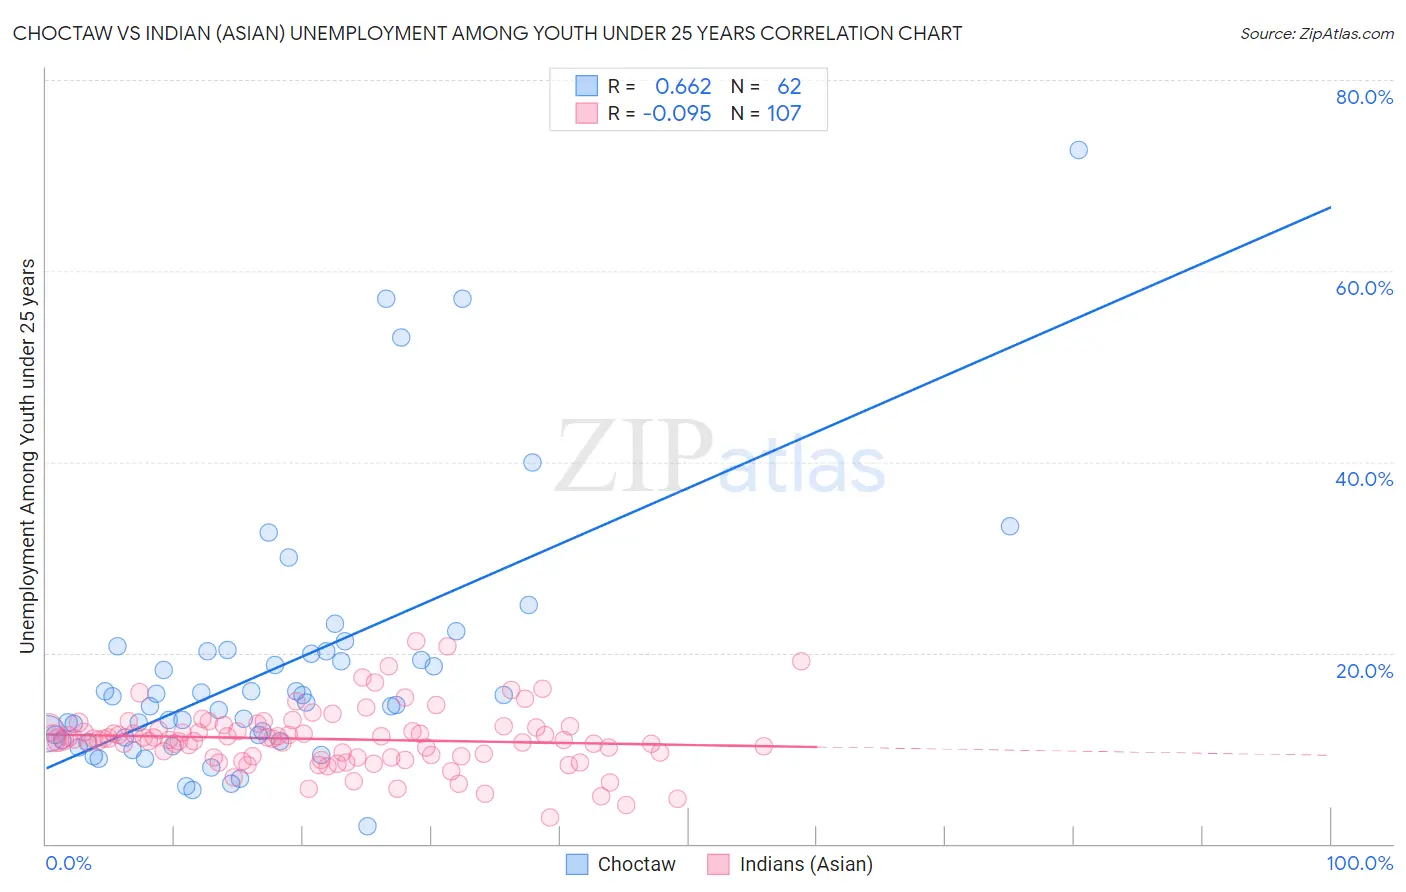 Choctaw vs Indian (Asian) Unemployment Among Youth under 25 years